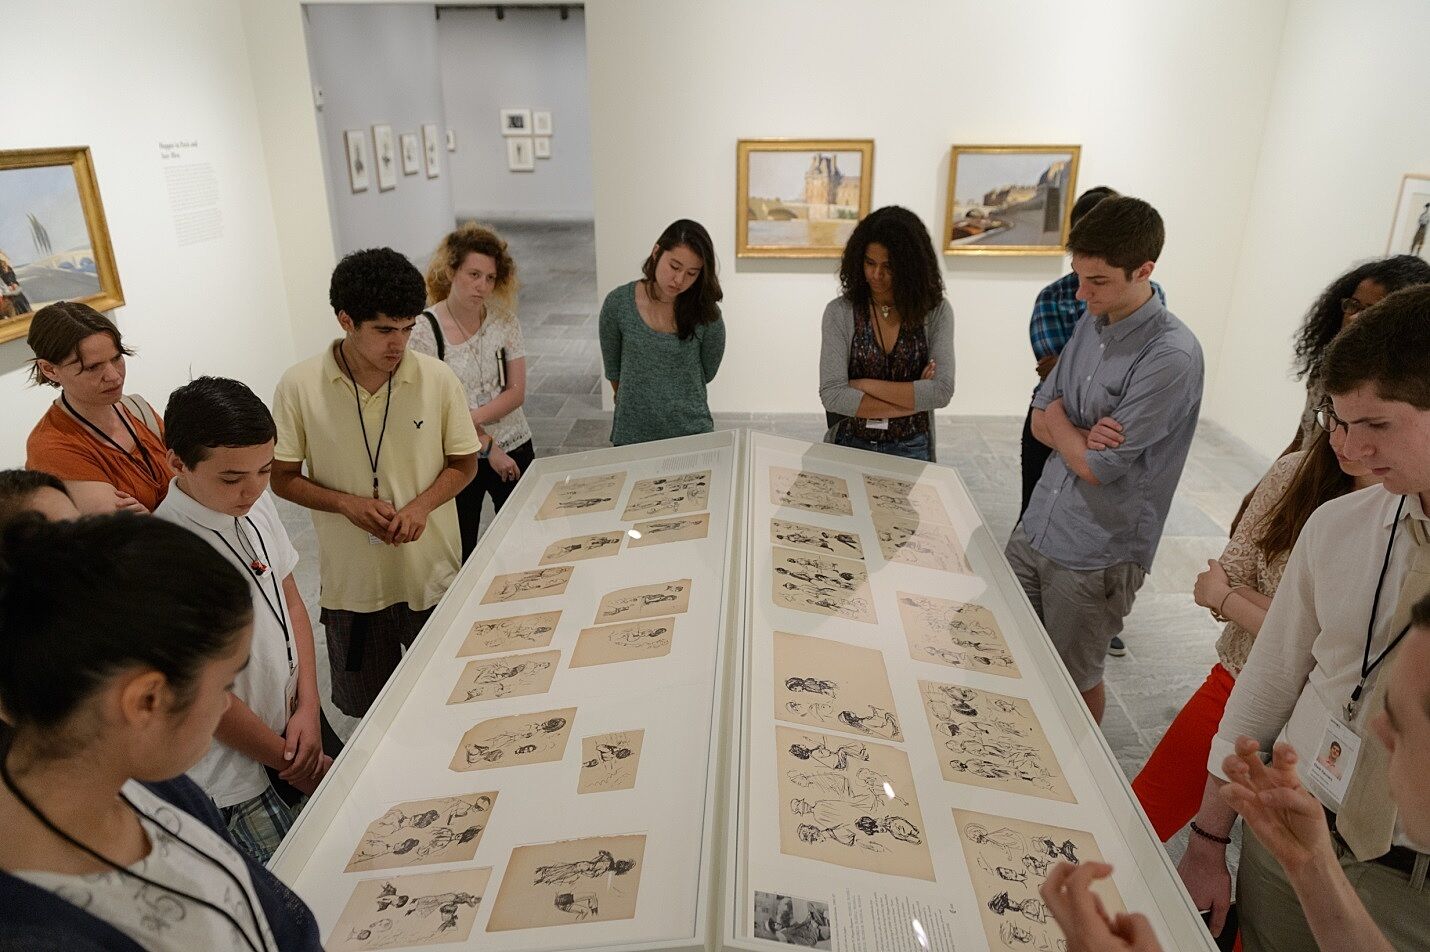 A student tour group gathers around drawings by Edward Hopper.